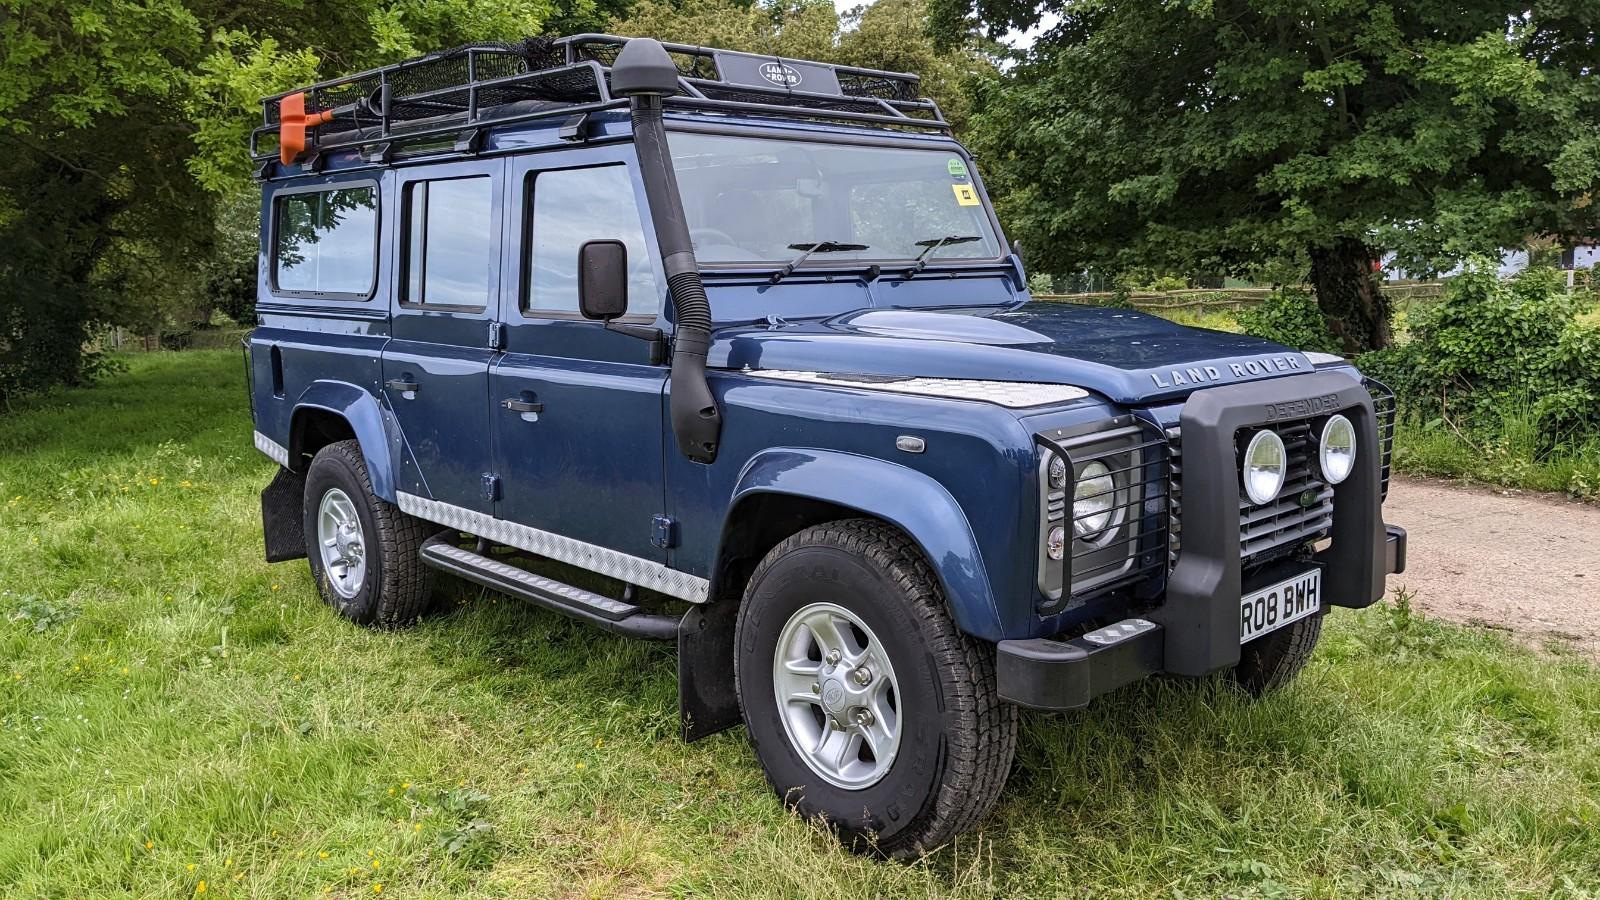 Nieuwjaar studie Snor Land Rover Defender 110 County Station Wagon 2.4 Puma XS TDCi 2008 1 0wner  only 3940 mls from new. "The Cairns" #436 - Arrow Works